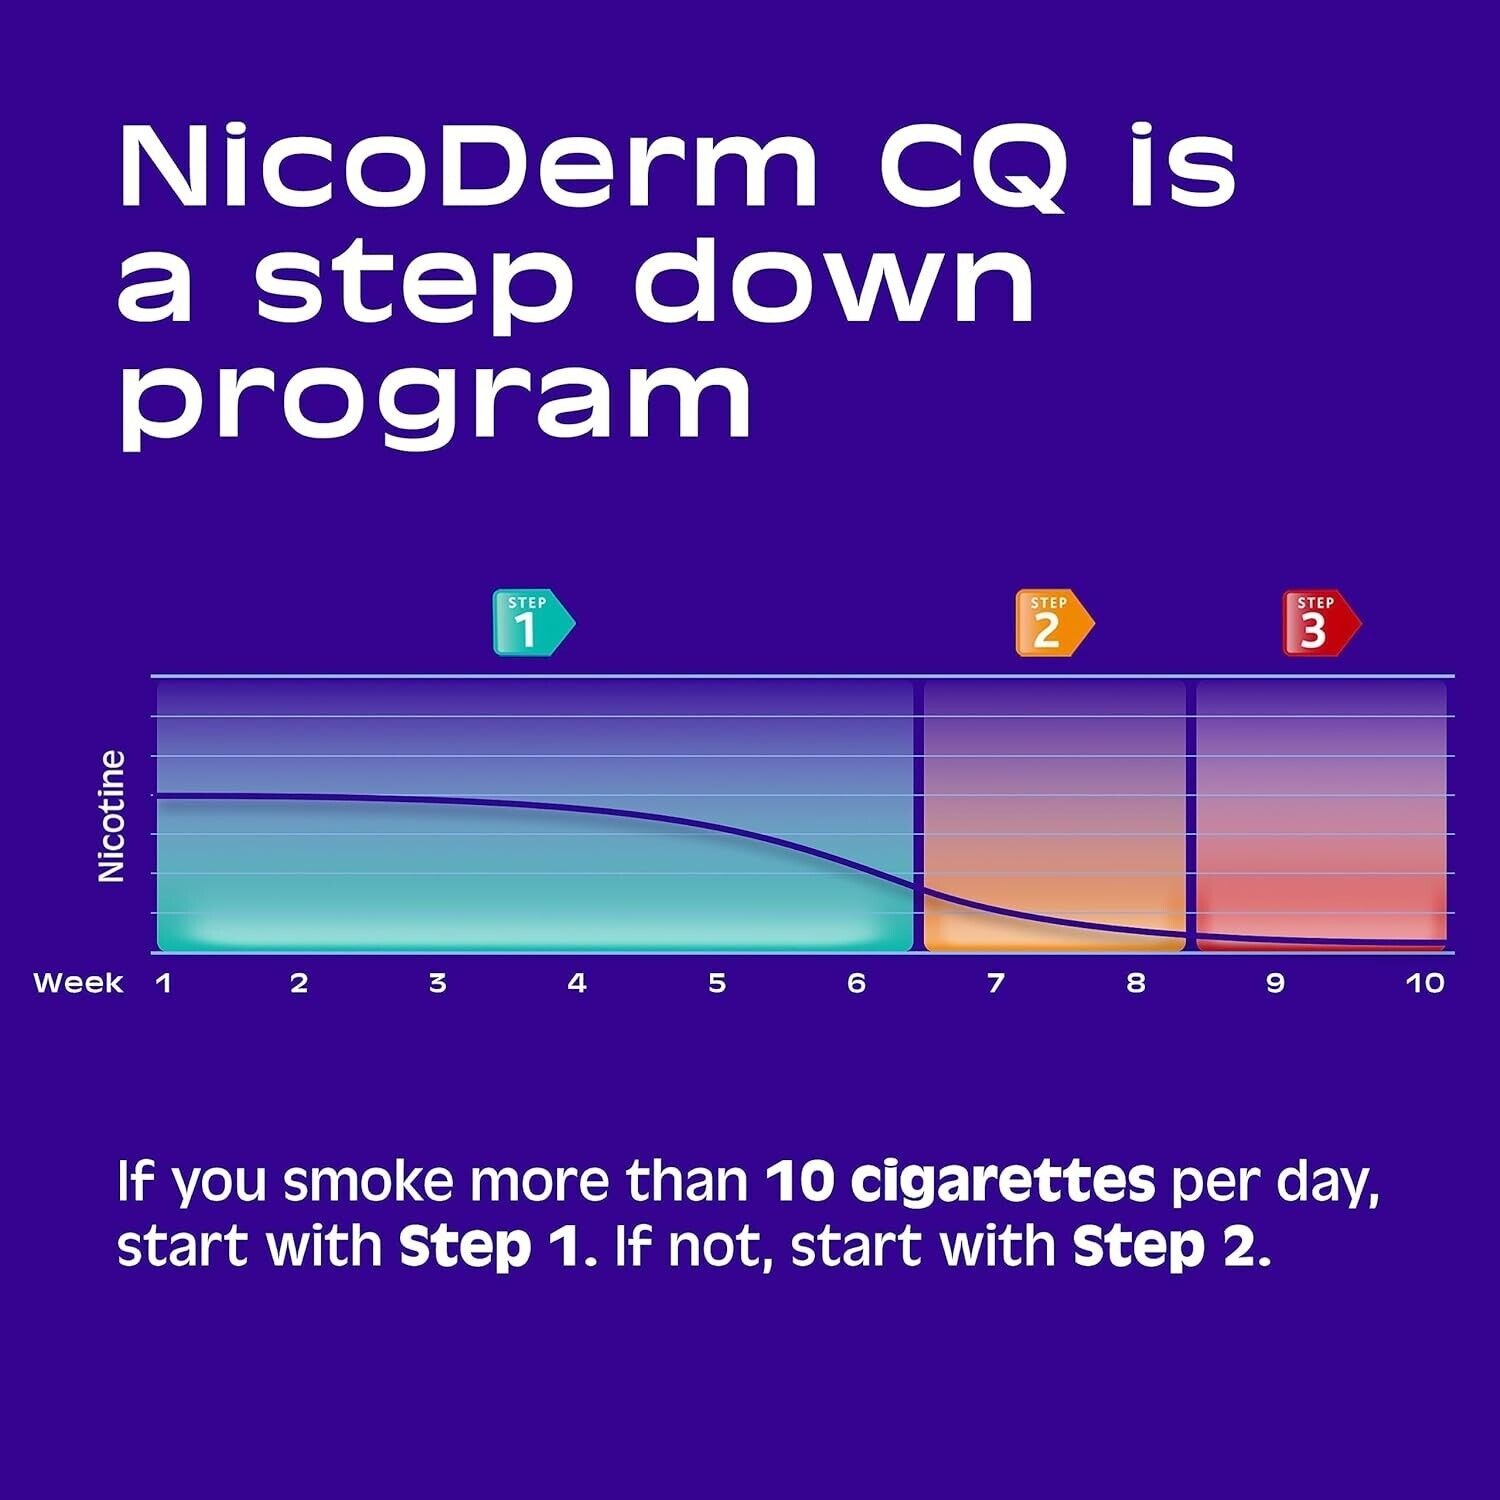 Nicotine Patches to Quit Smoking - 21 mg, 14 Count, Stop Smoking Aid Unbranded - фотография #7